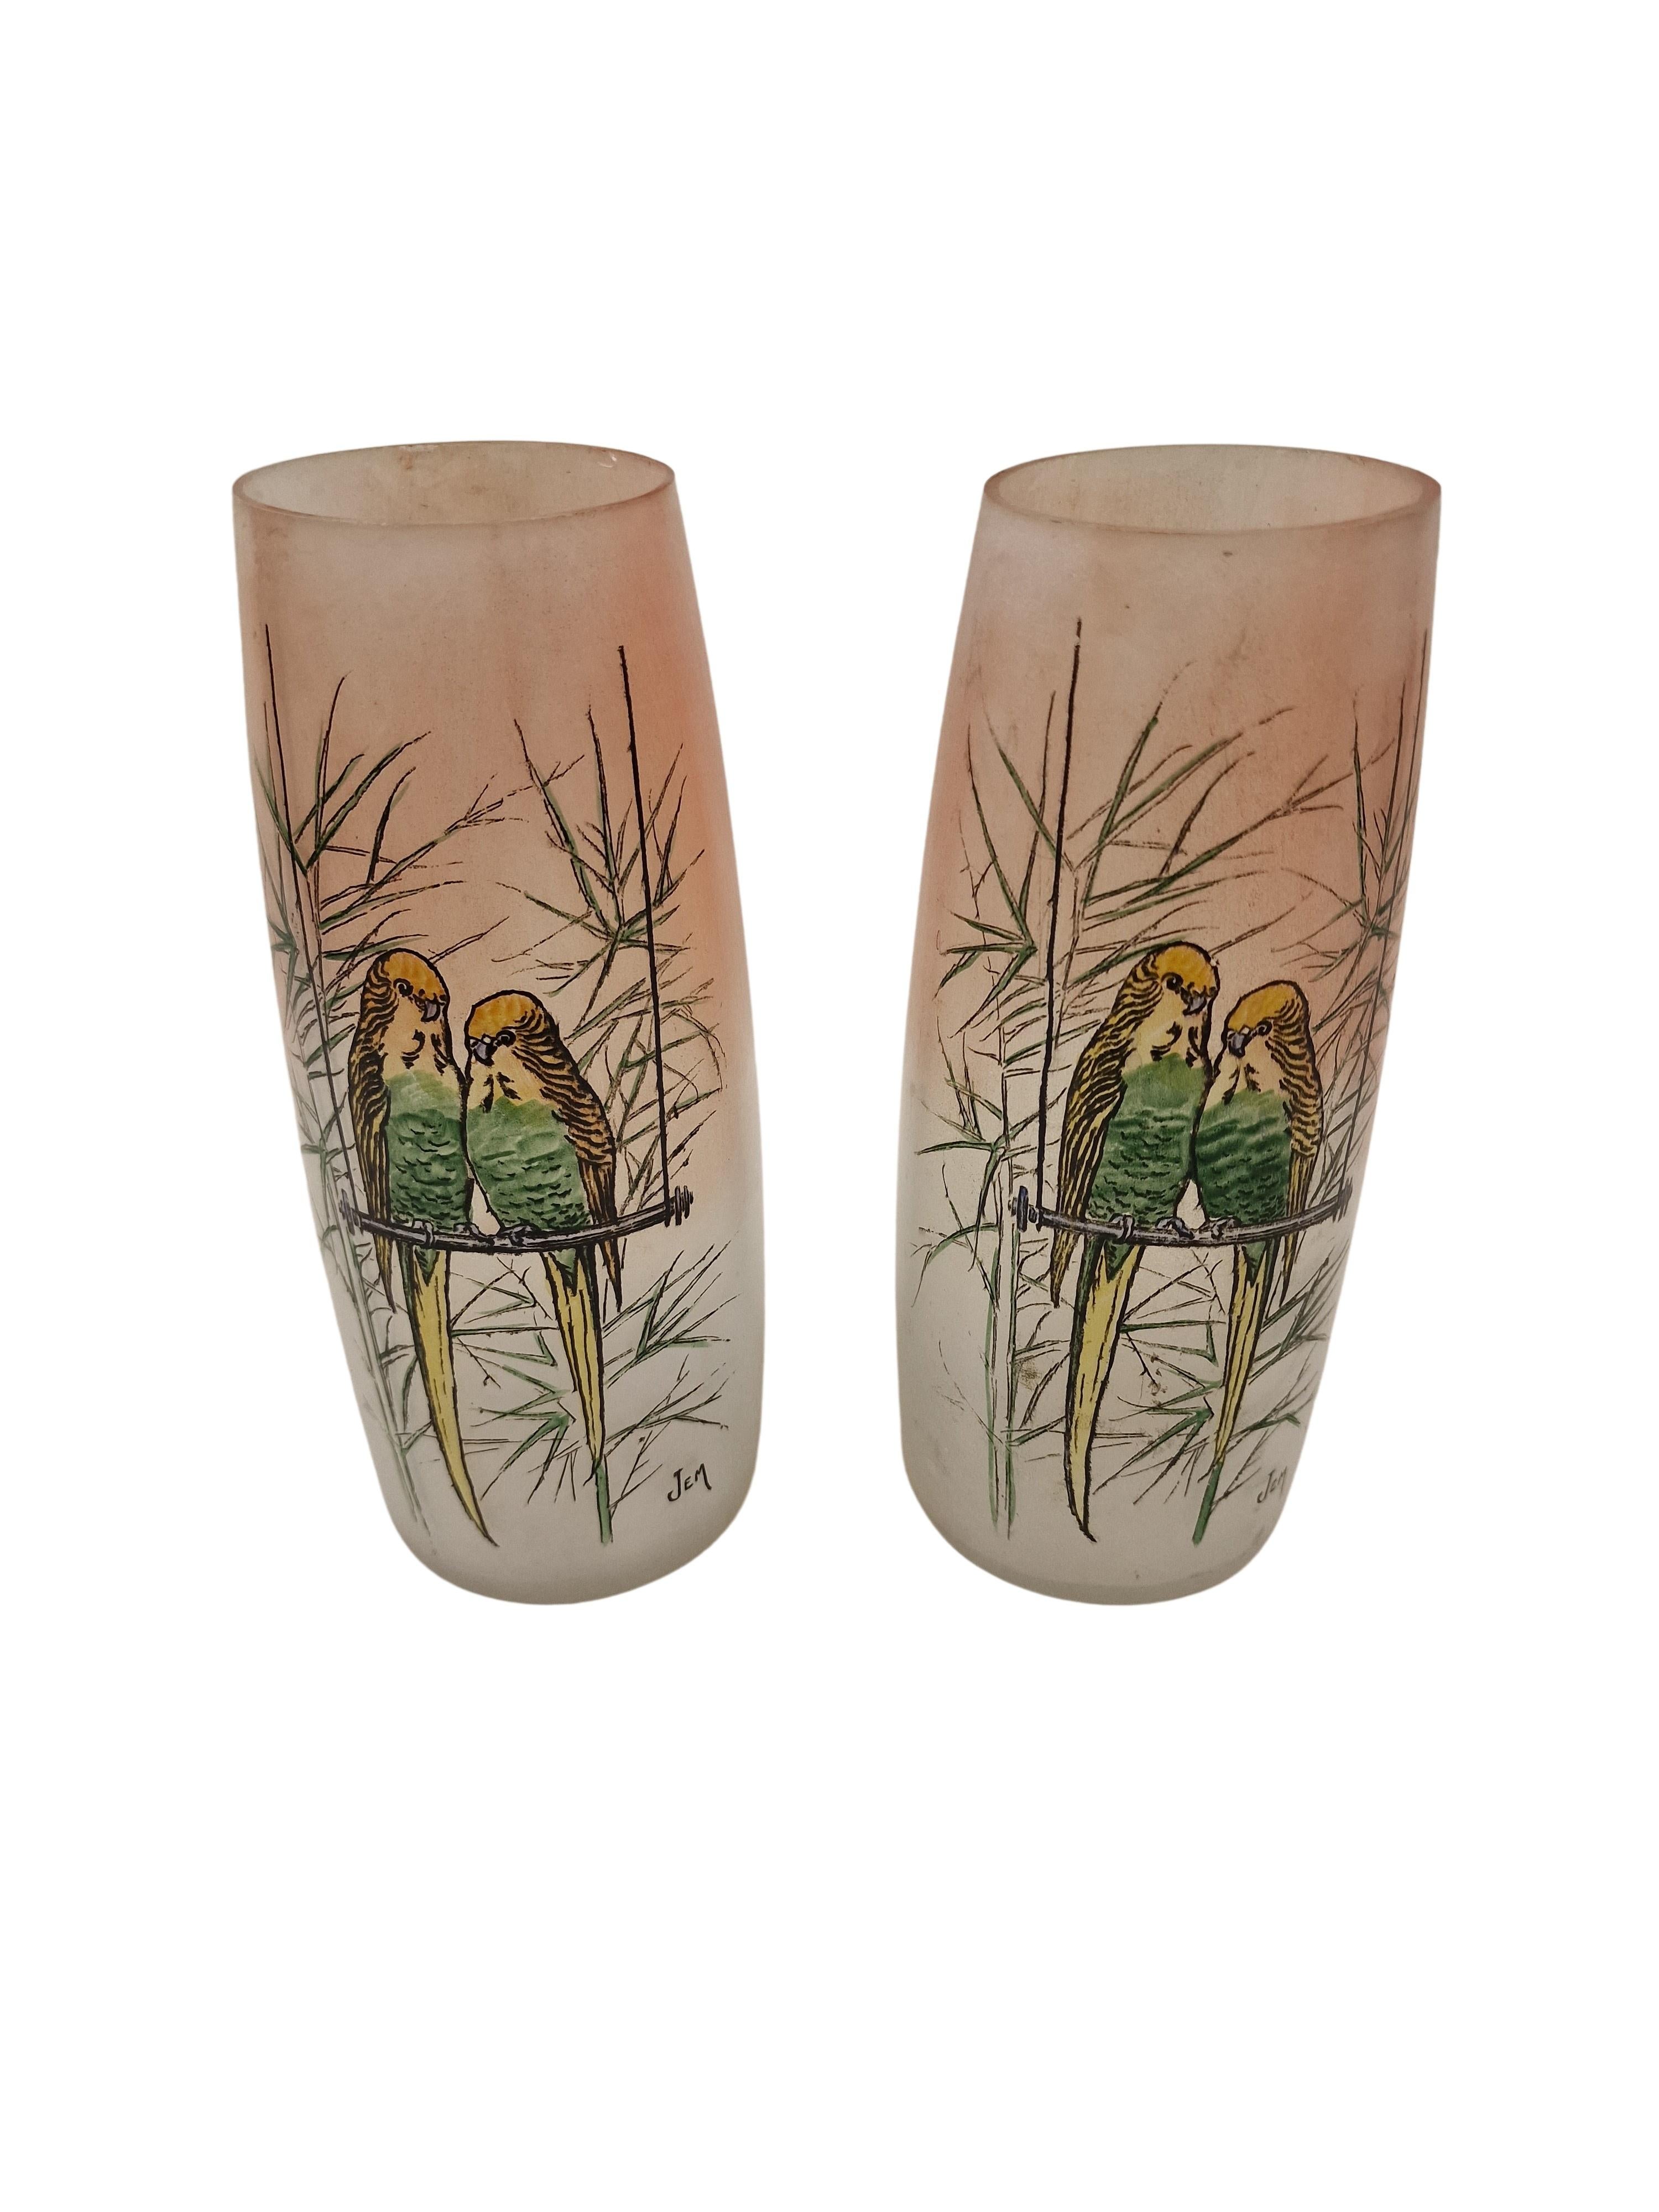 Very nice pair of flower vases, made in the Art Deco period, around 1920, from the famous verrerie Legras in France. 

The two vases have a cubic raised shape and have a special pastel color throughout. 
The vases are decorated with quality handmade